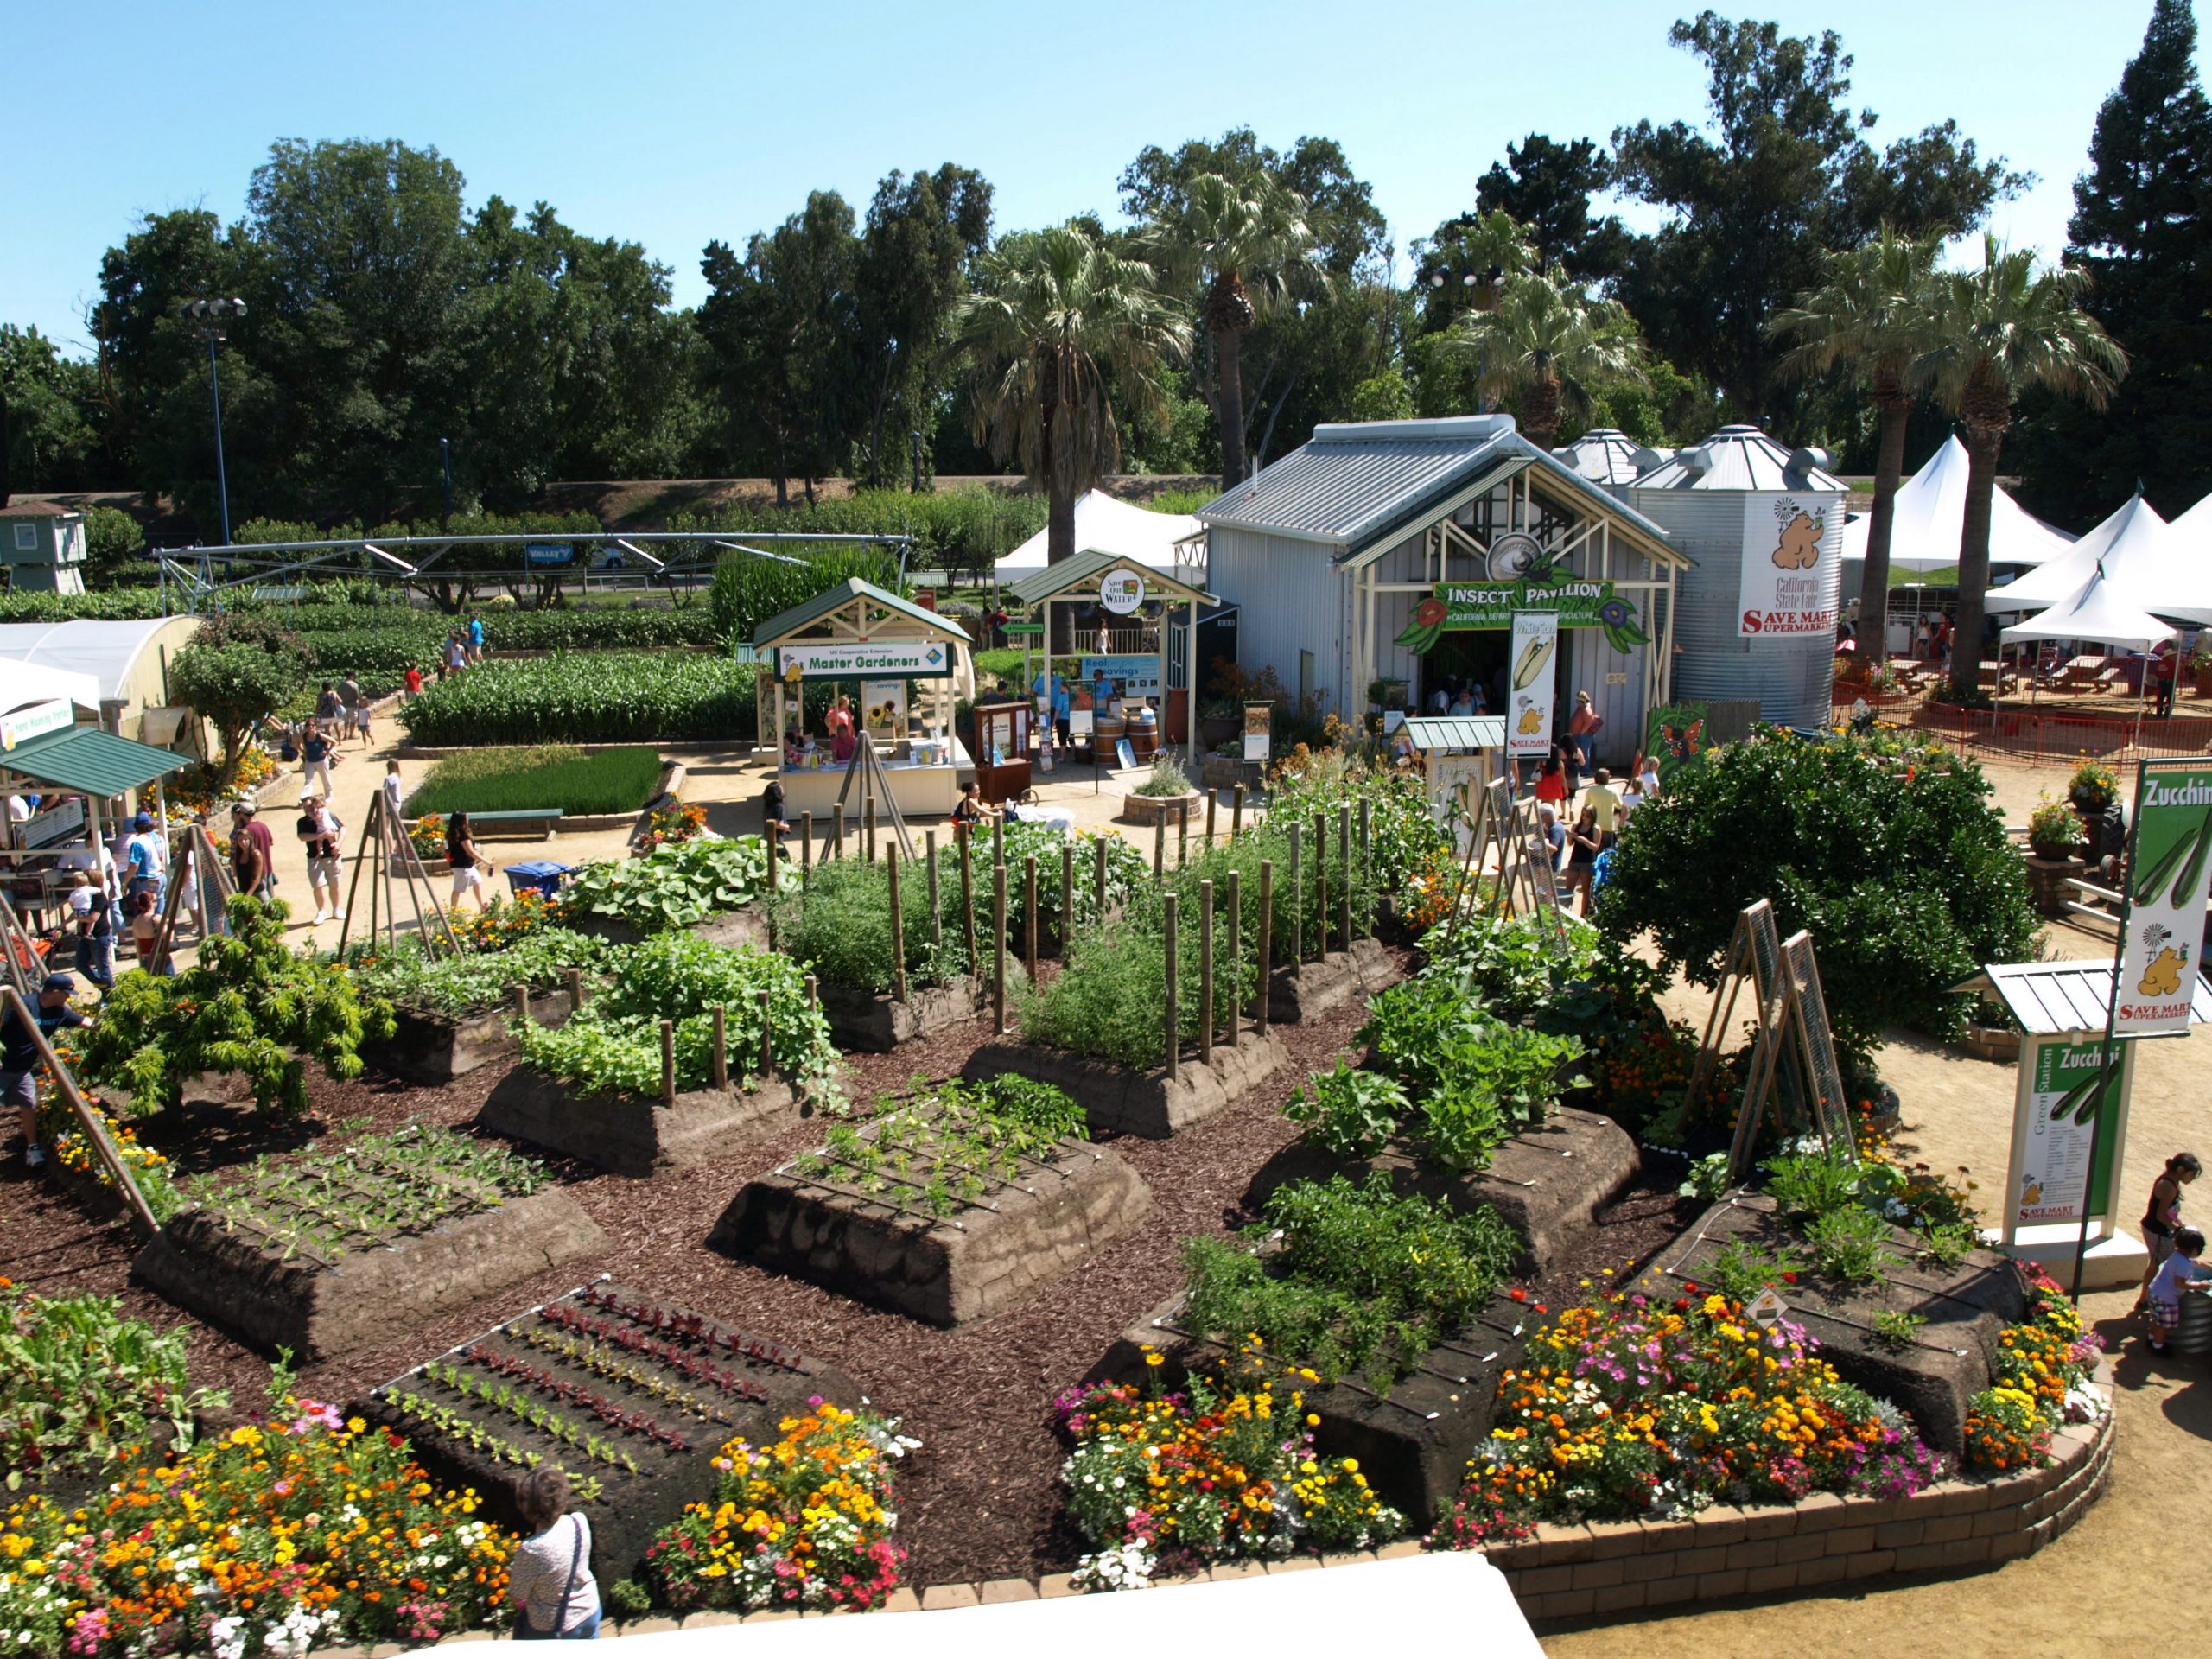 The Farm overview at CA State Fair - approved for media use